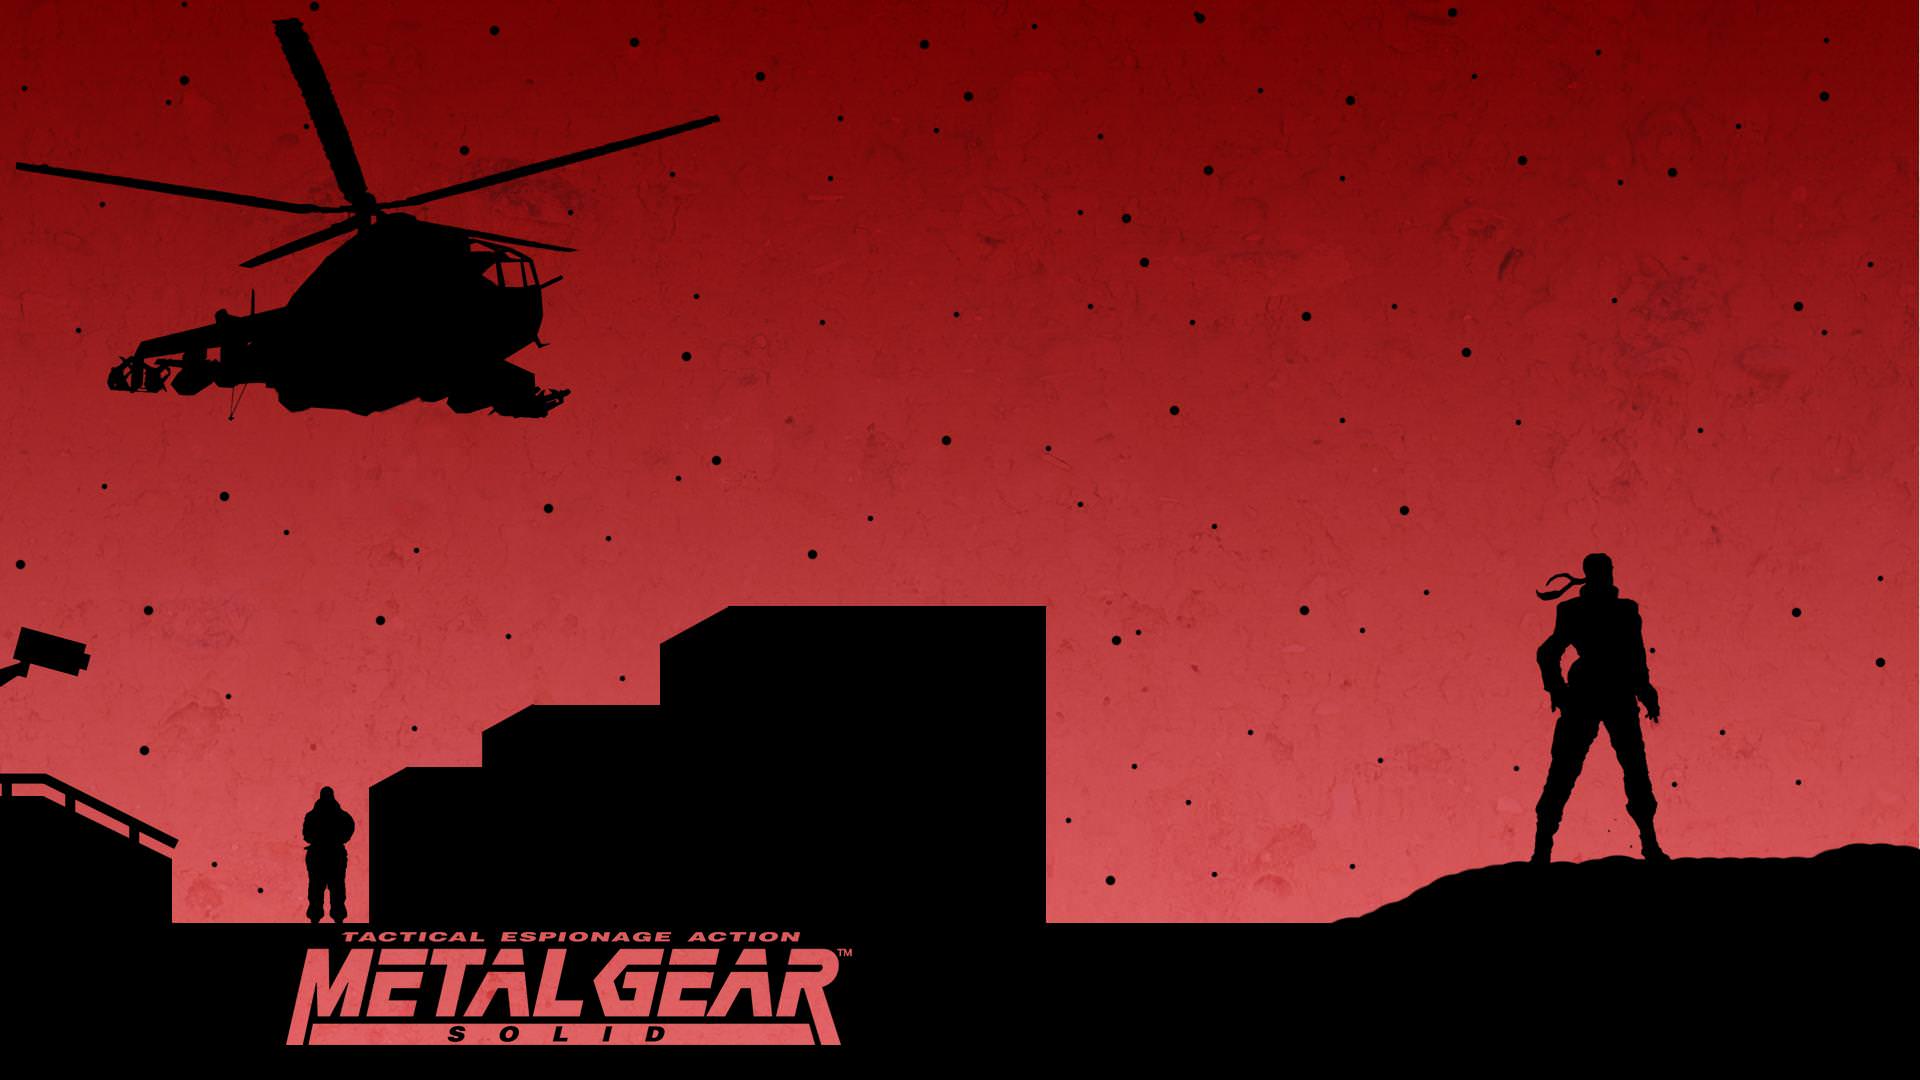 Metal Gear Solid Silhouette Wallpaper Collection